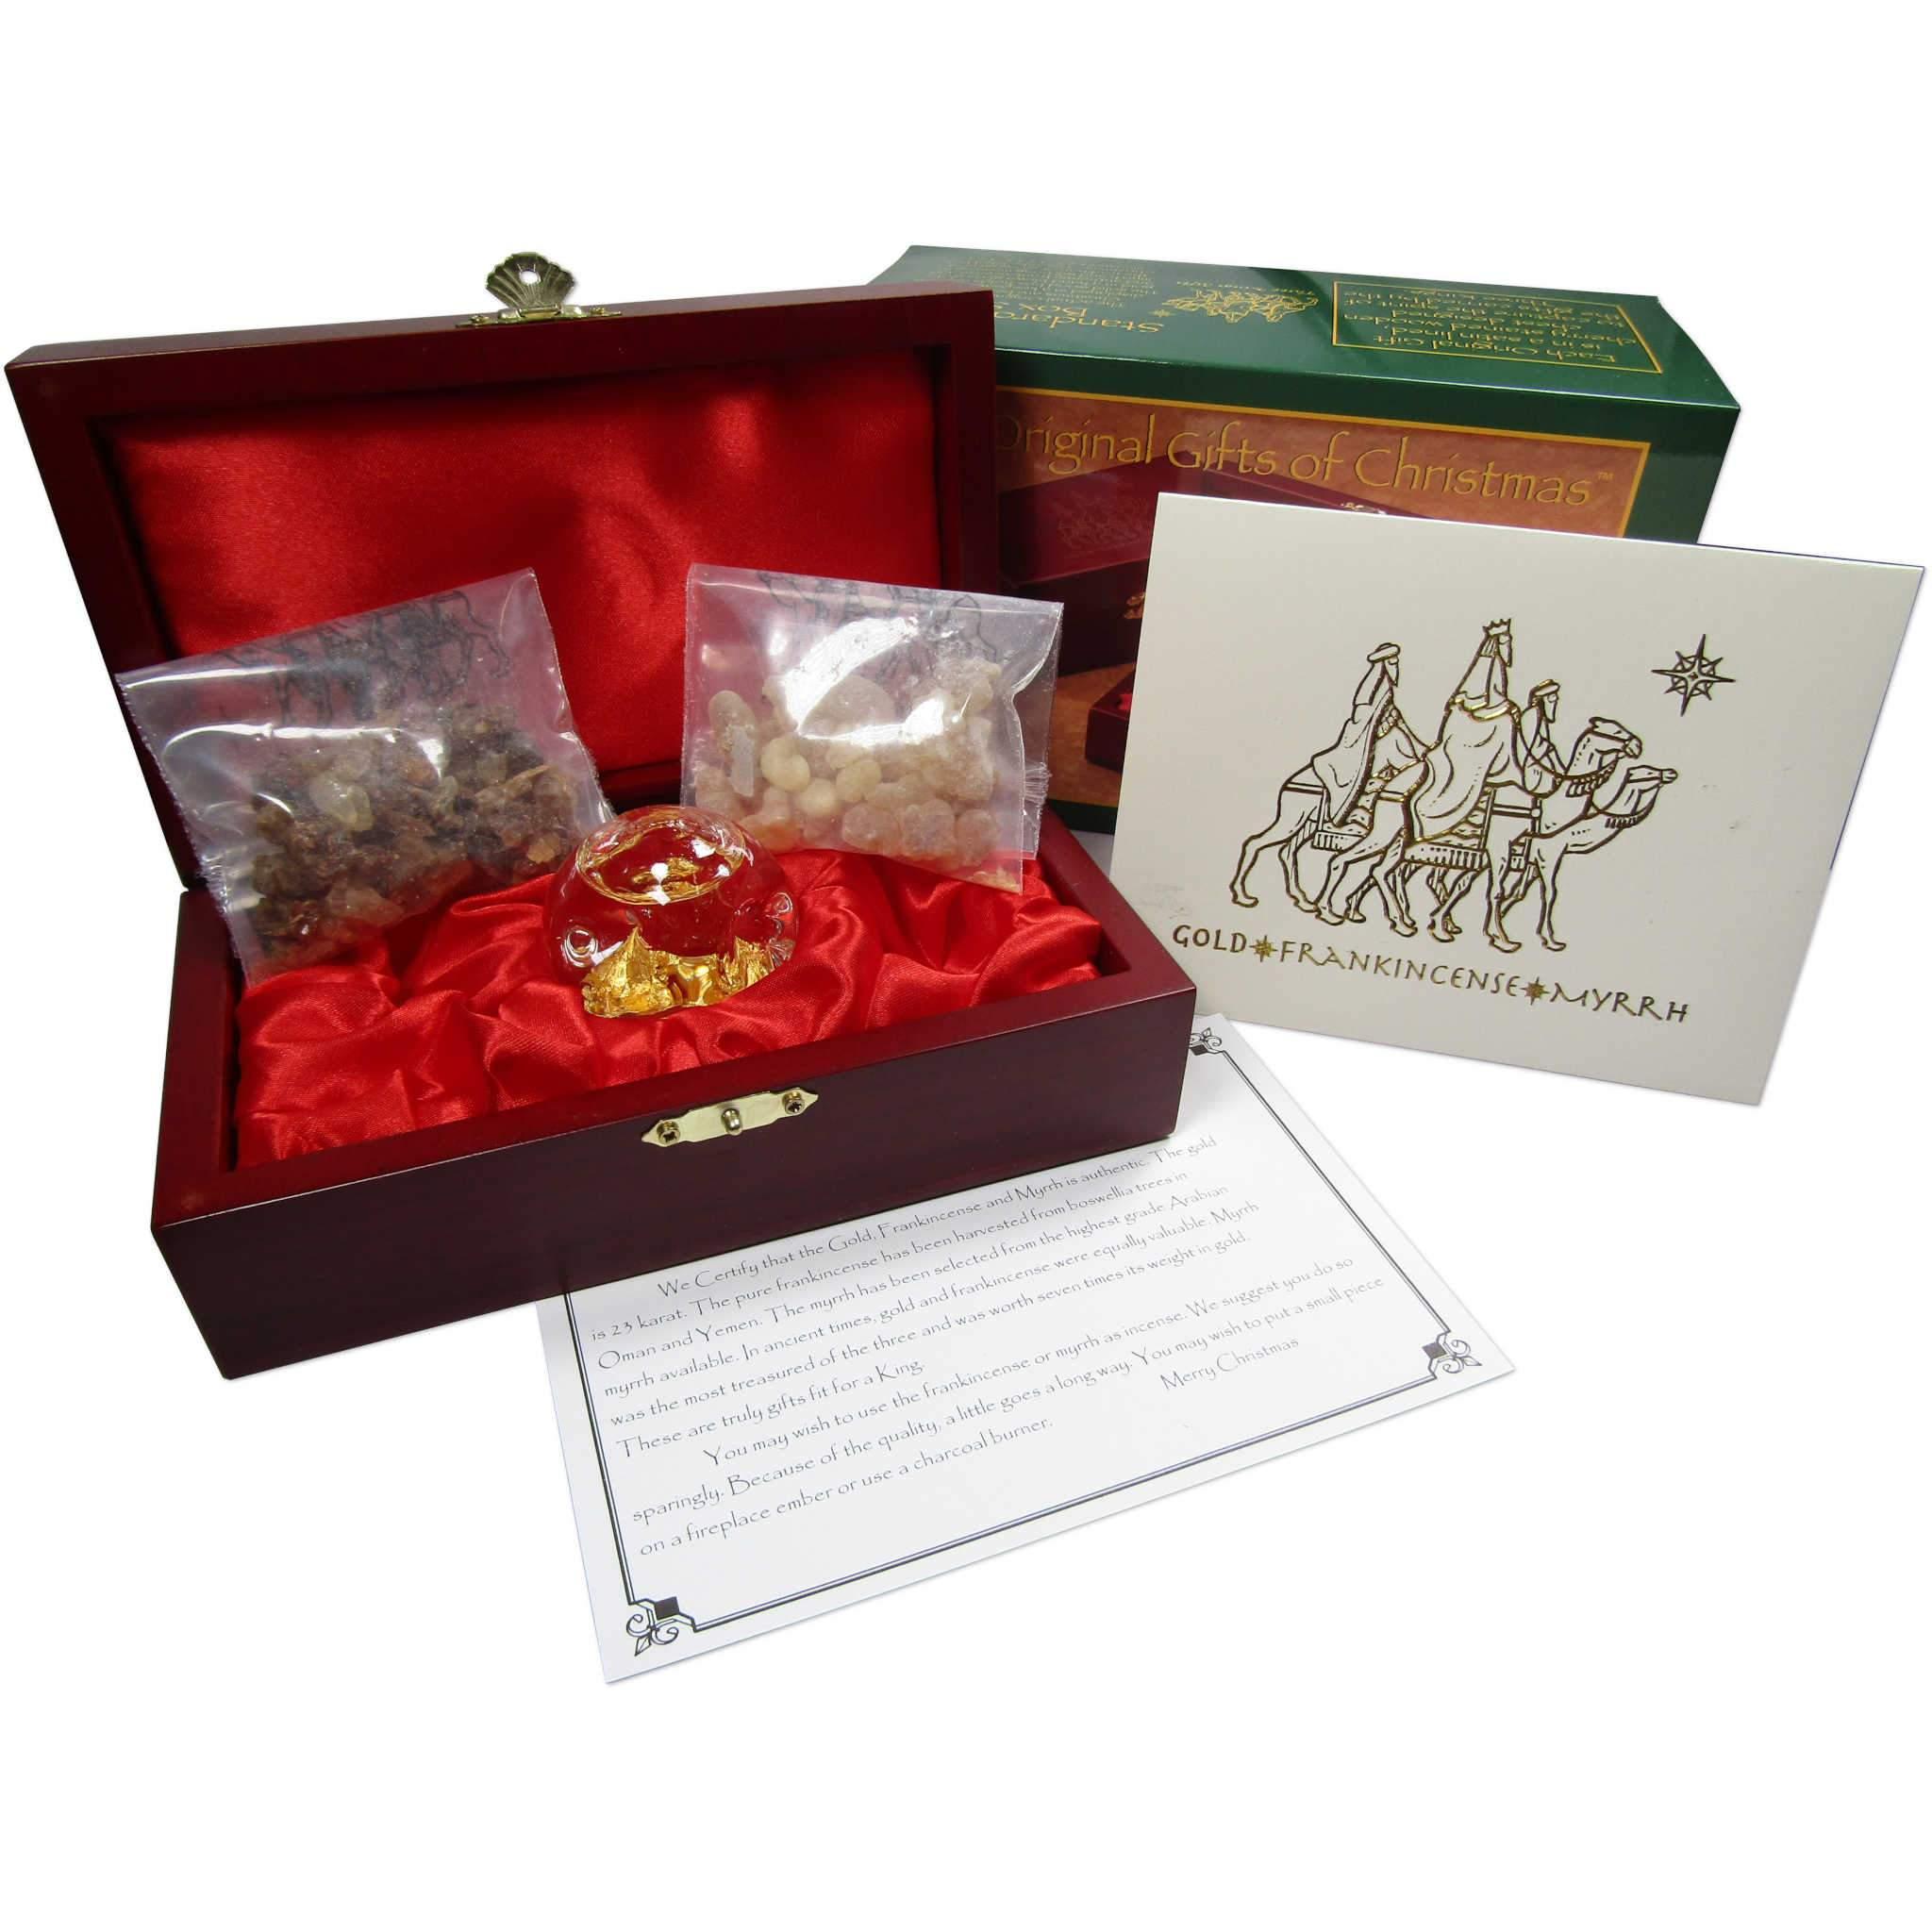 The Original Gifts Of Christmas Gold Frankincense and Myrrh Box